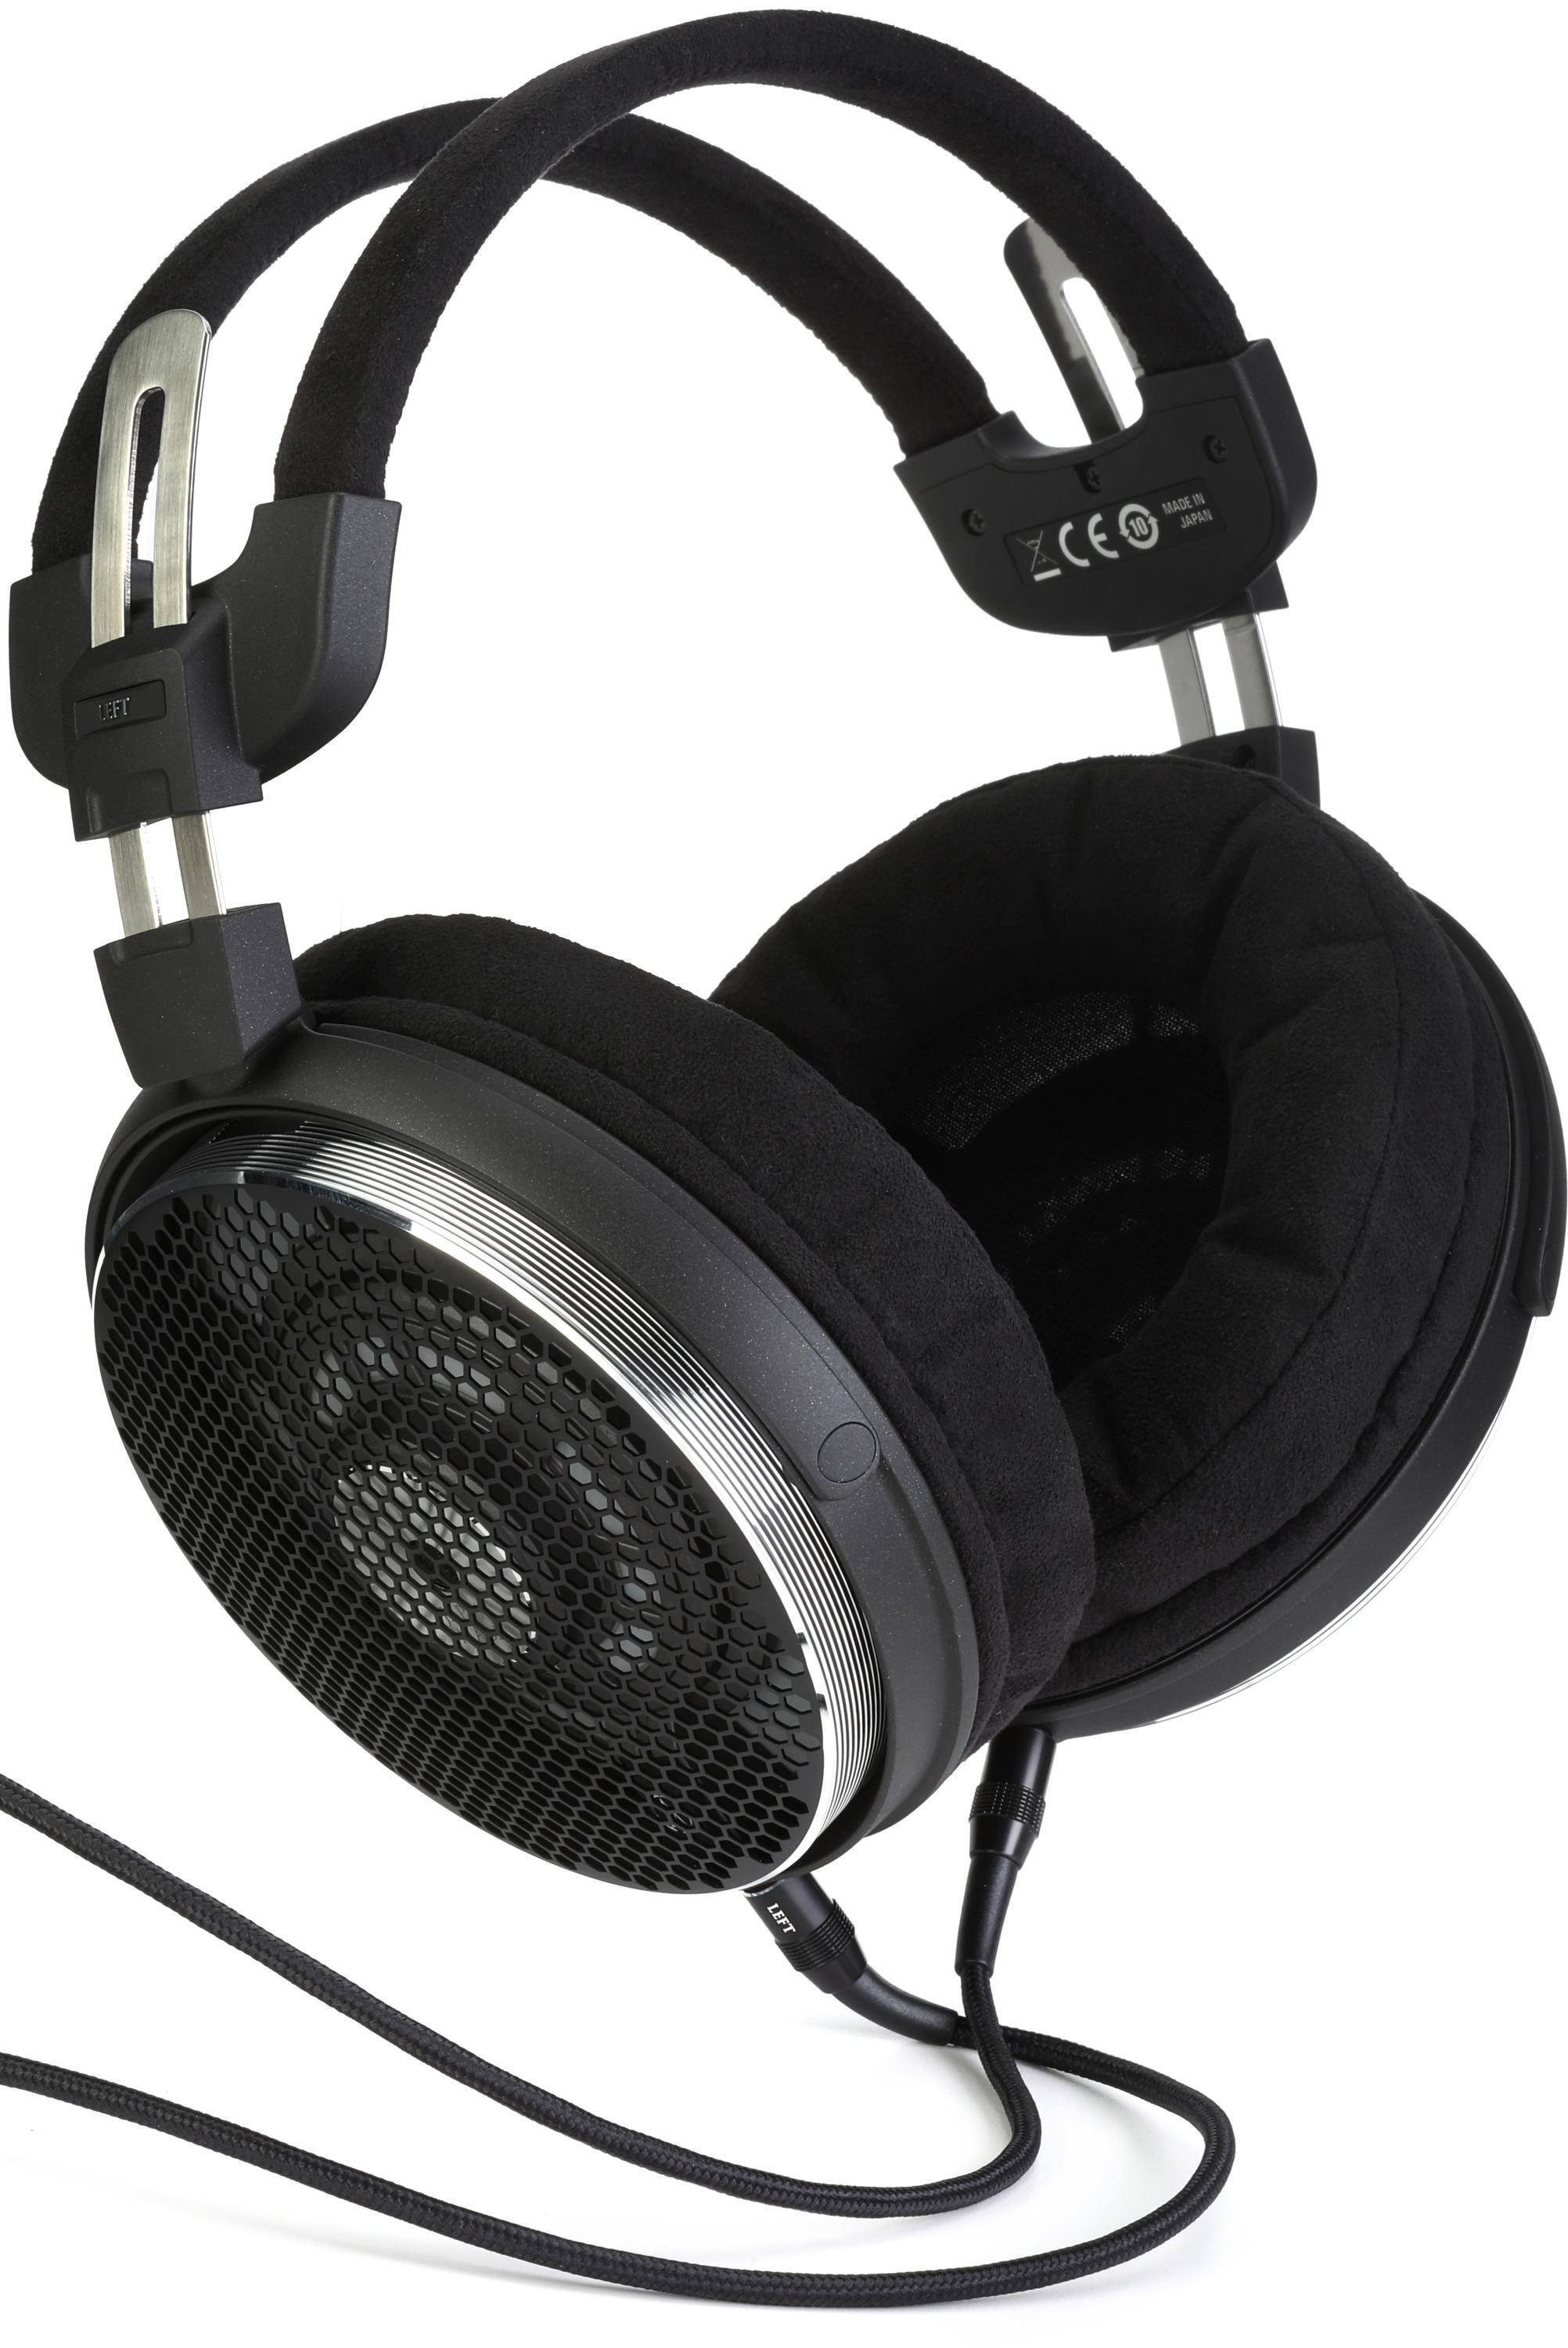 Audio-Technica ATH-ADX5000 Open-back Dynamic Headphones | Sweetwater